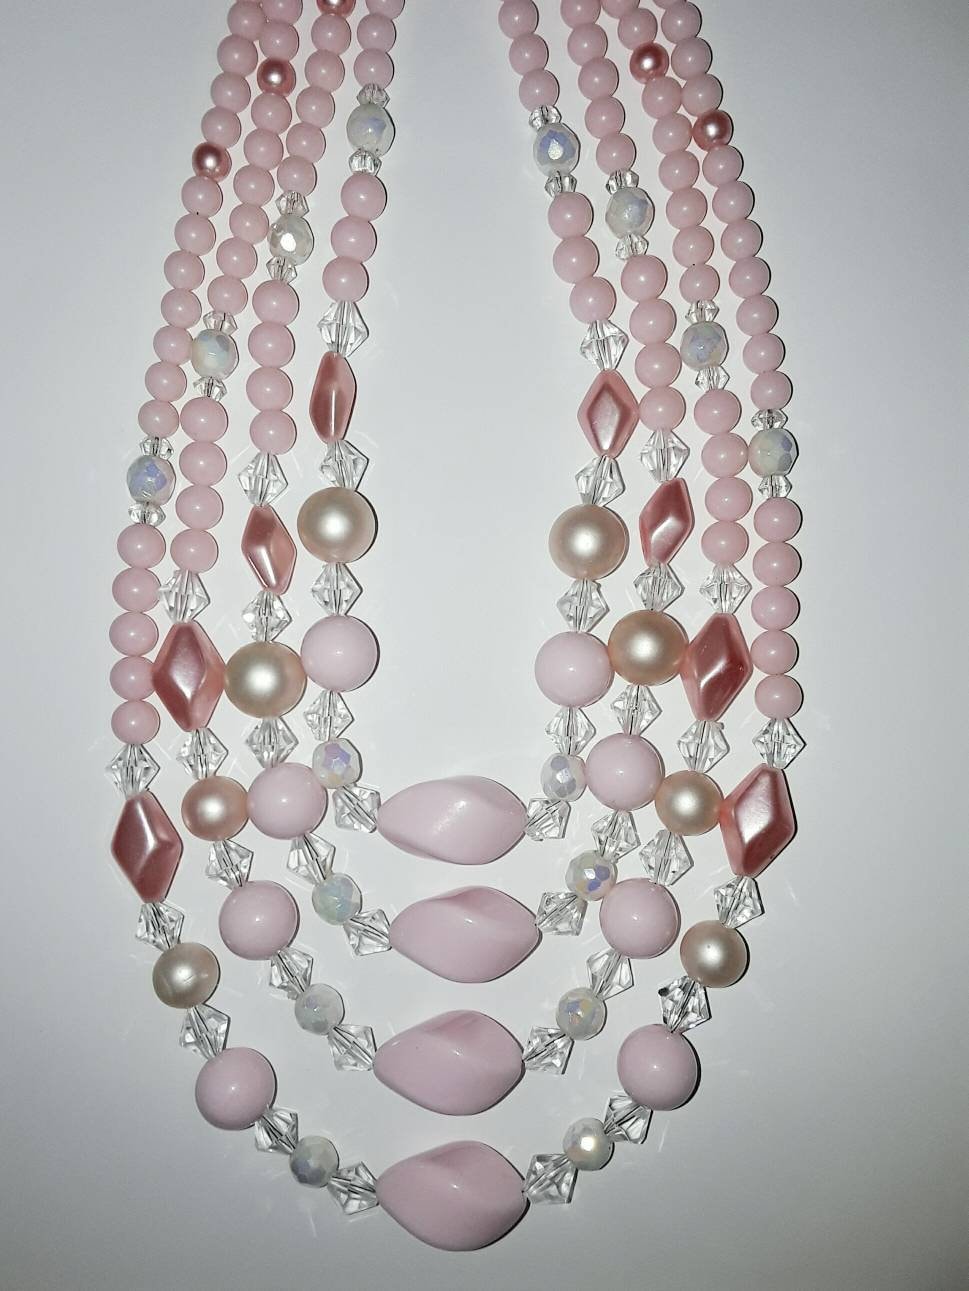 Lucky fish dots beads necklace pink – KBJewels555